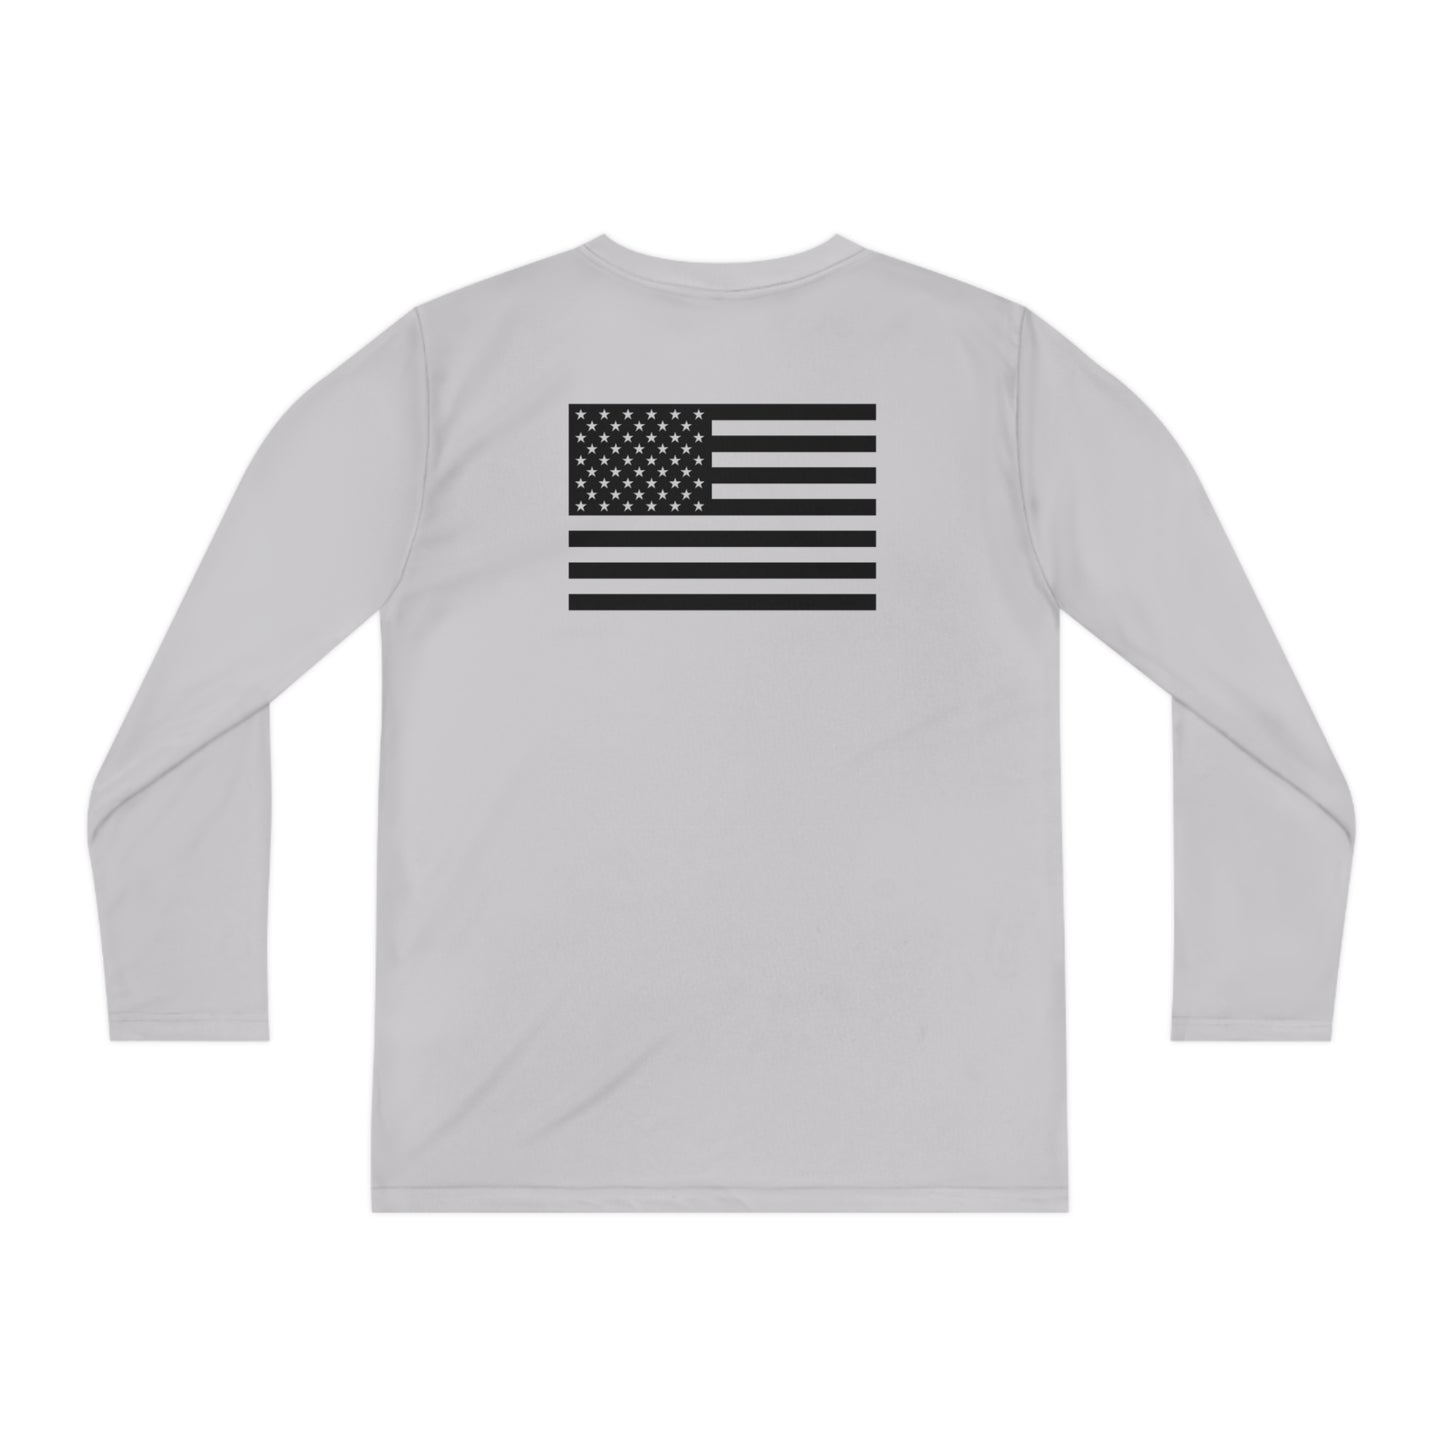 2Bdiscontinued. youth long sleeve athletic Tee